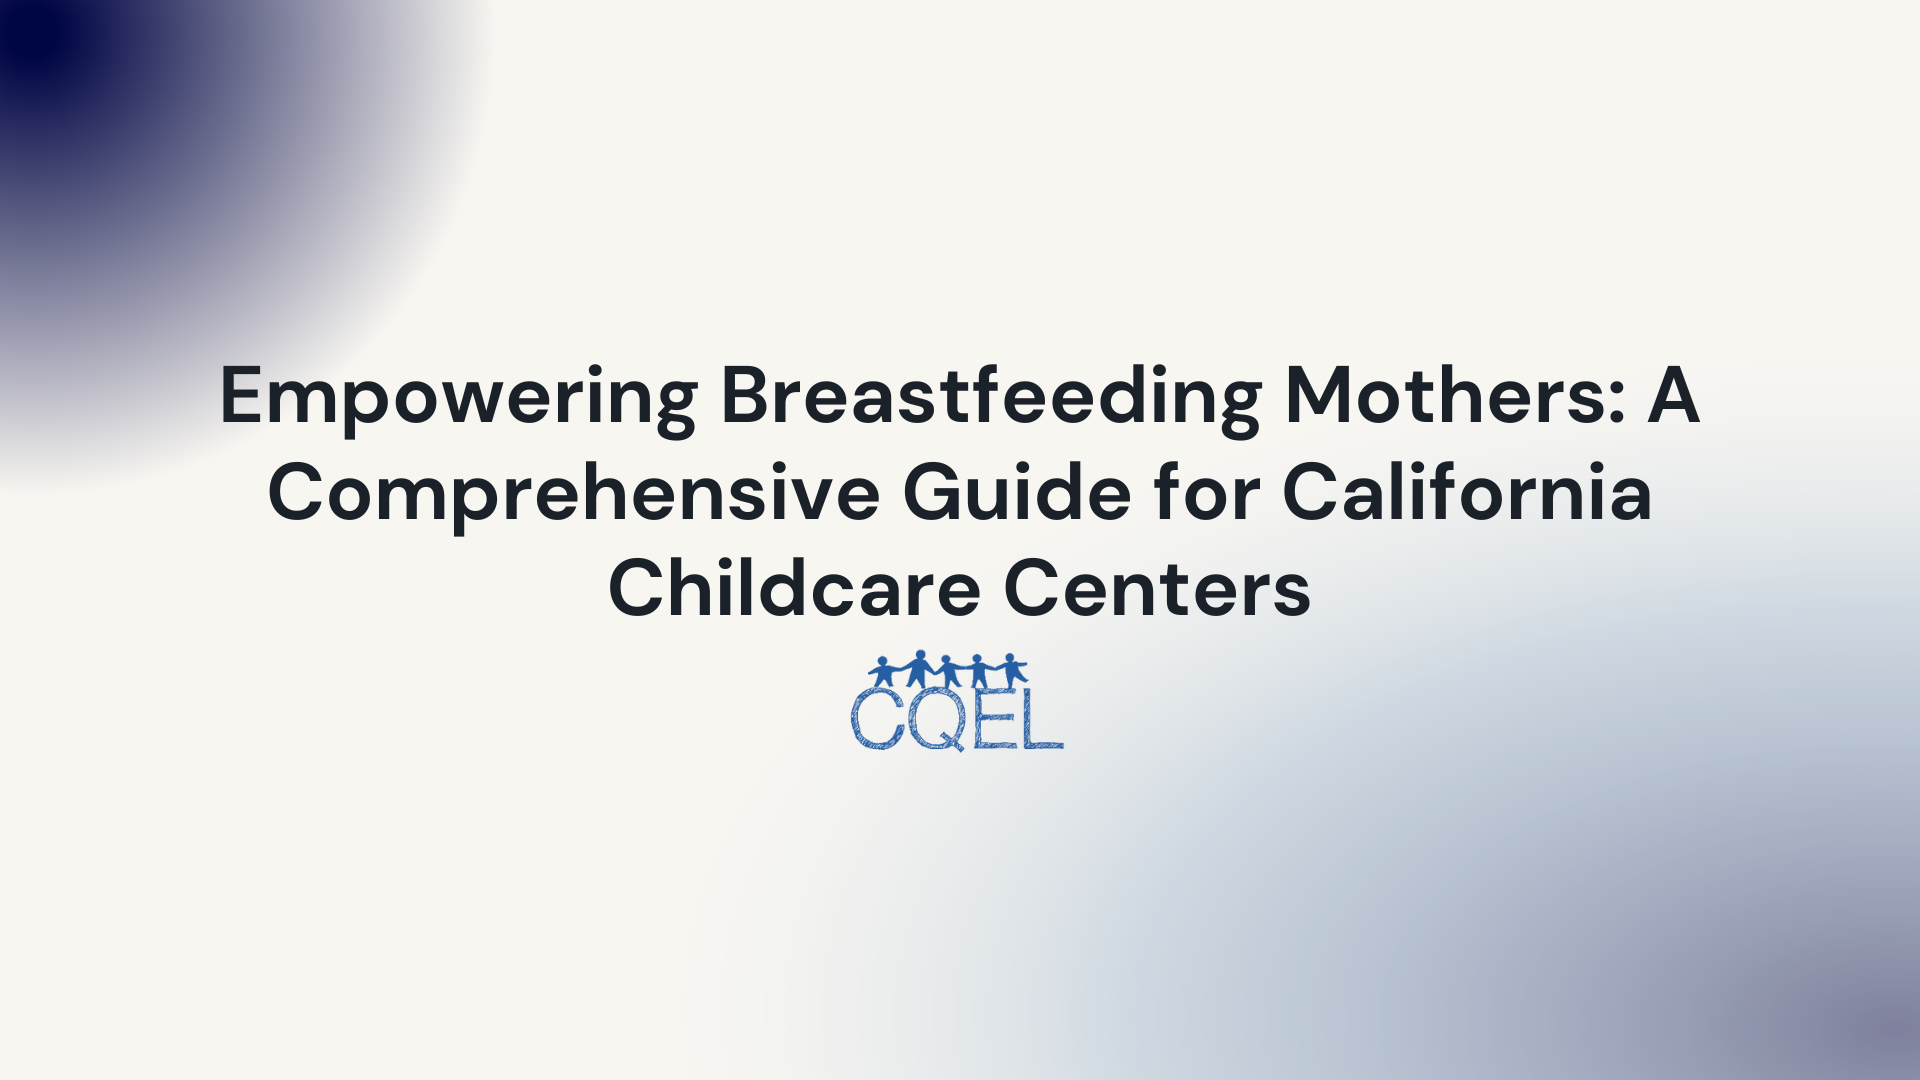 Empowering Breastfeeding Mothers: A Comprehensive Guide for California Childcare Centers